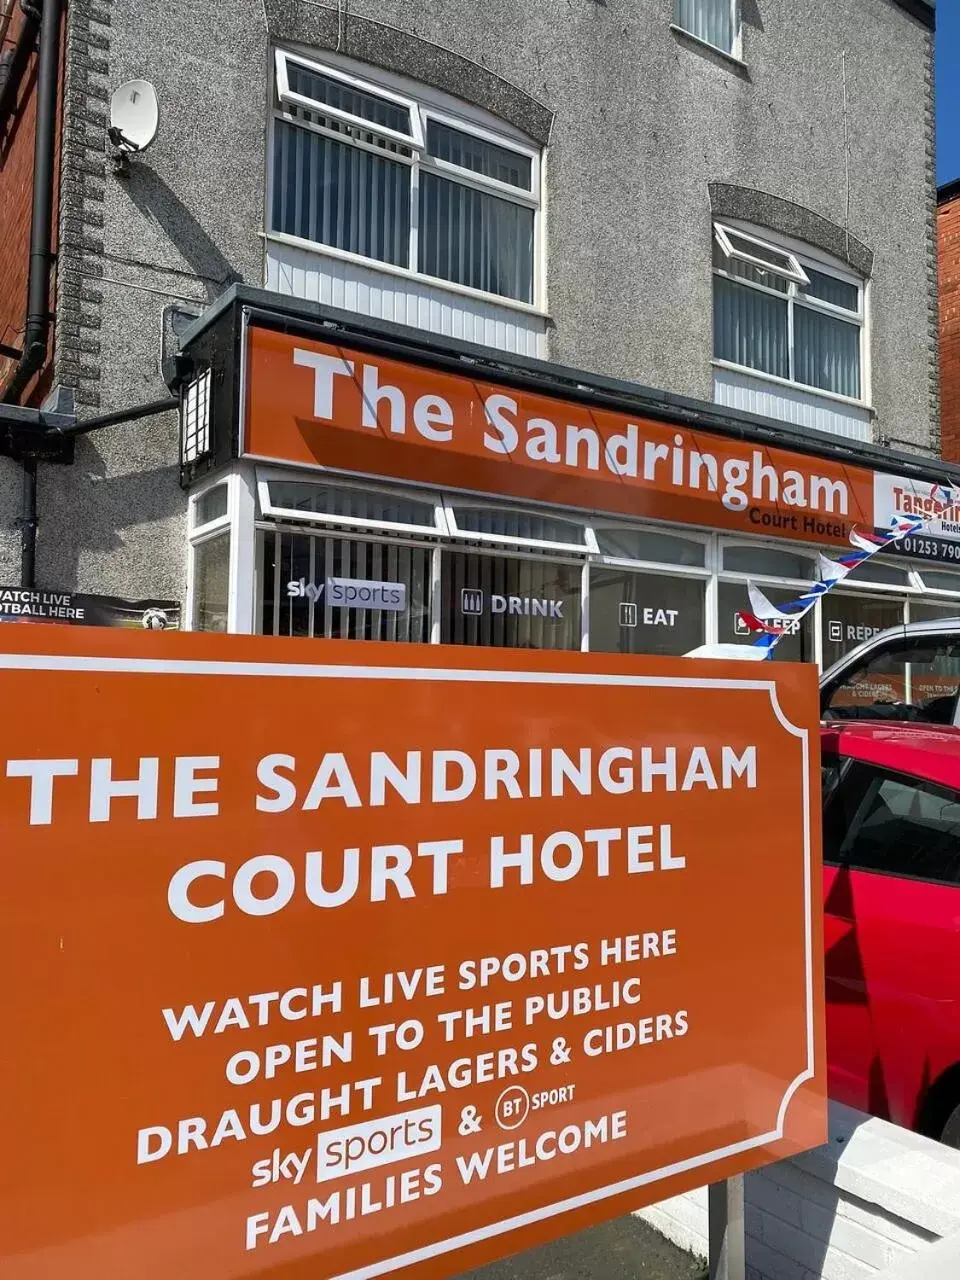 Property logo or sign in The Sandringham Court Hotel & Sports Bar-Groups Welcome here-High Speed Wi-Fi